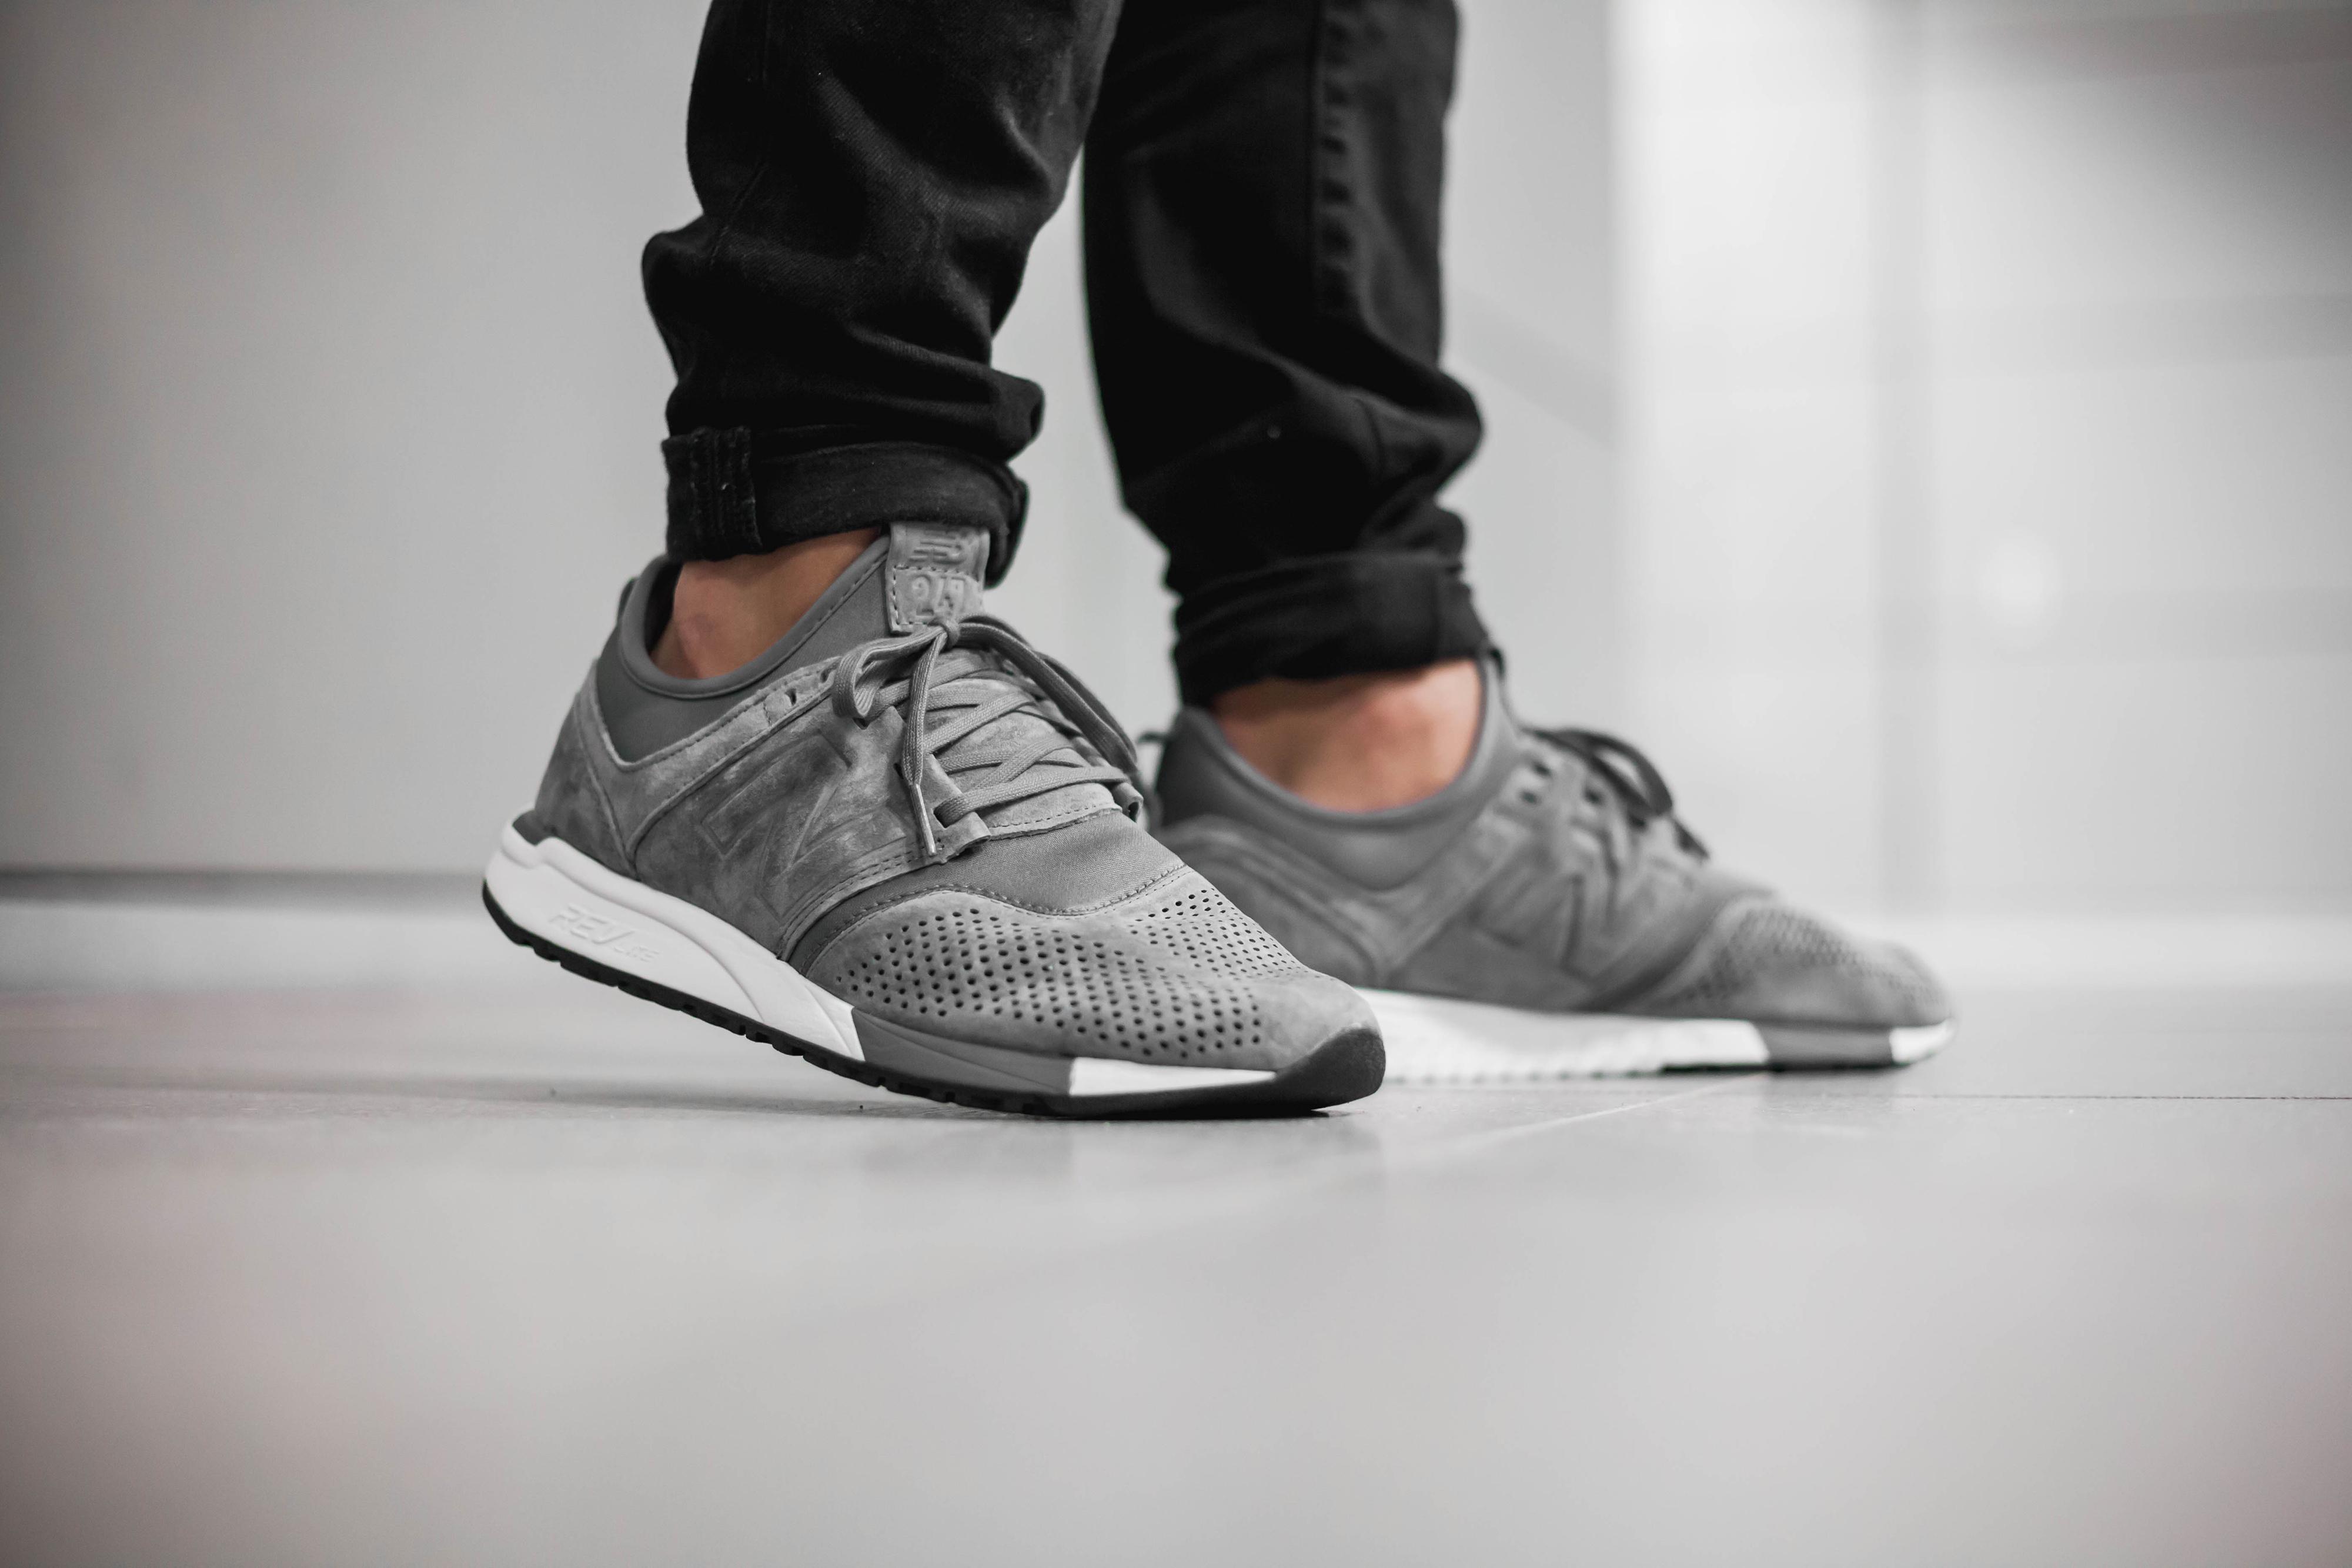 New Balance Suede Mrl 247 Ly in Grey (Gray) for Men - Lyst